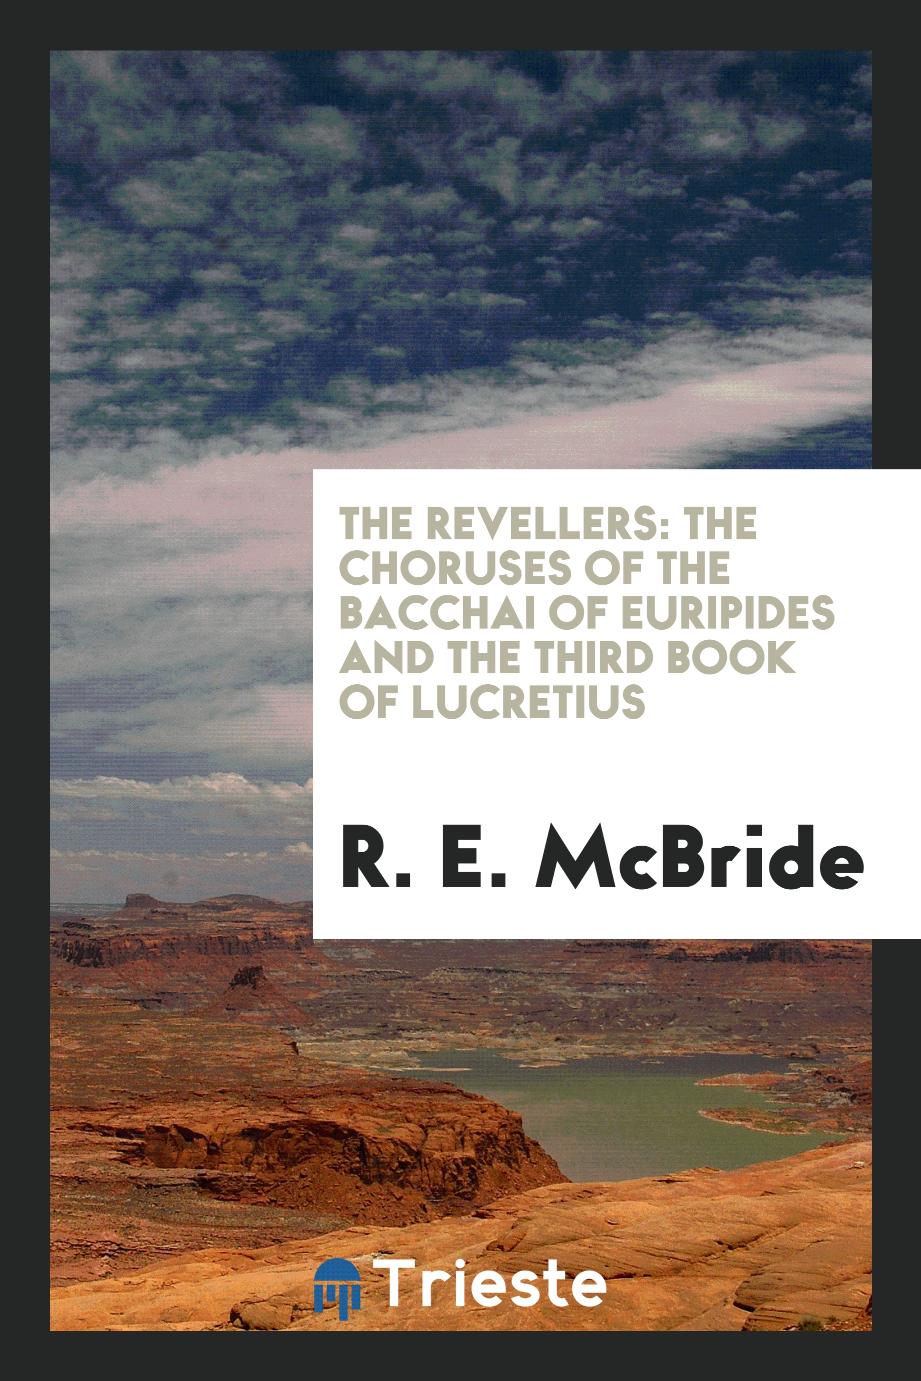 The Revellers: The Choruses of the Bacchai of Euripides and the Third Book of Lucretius